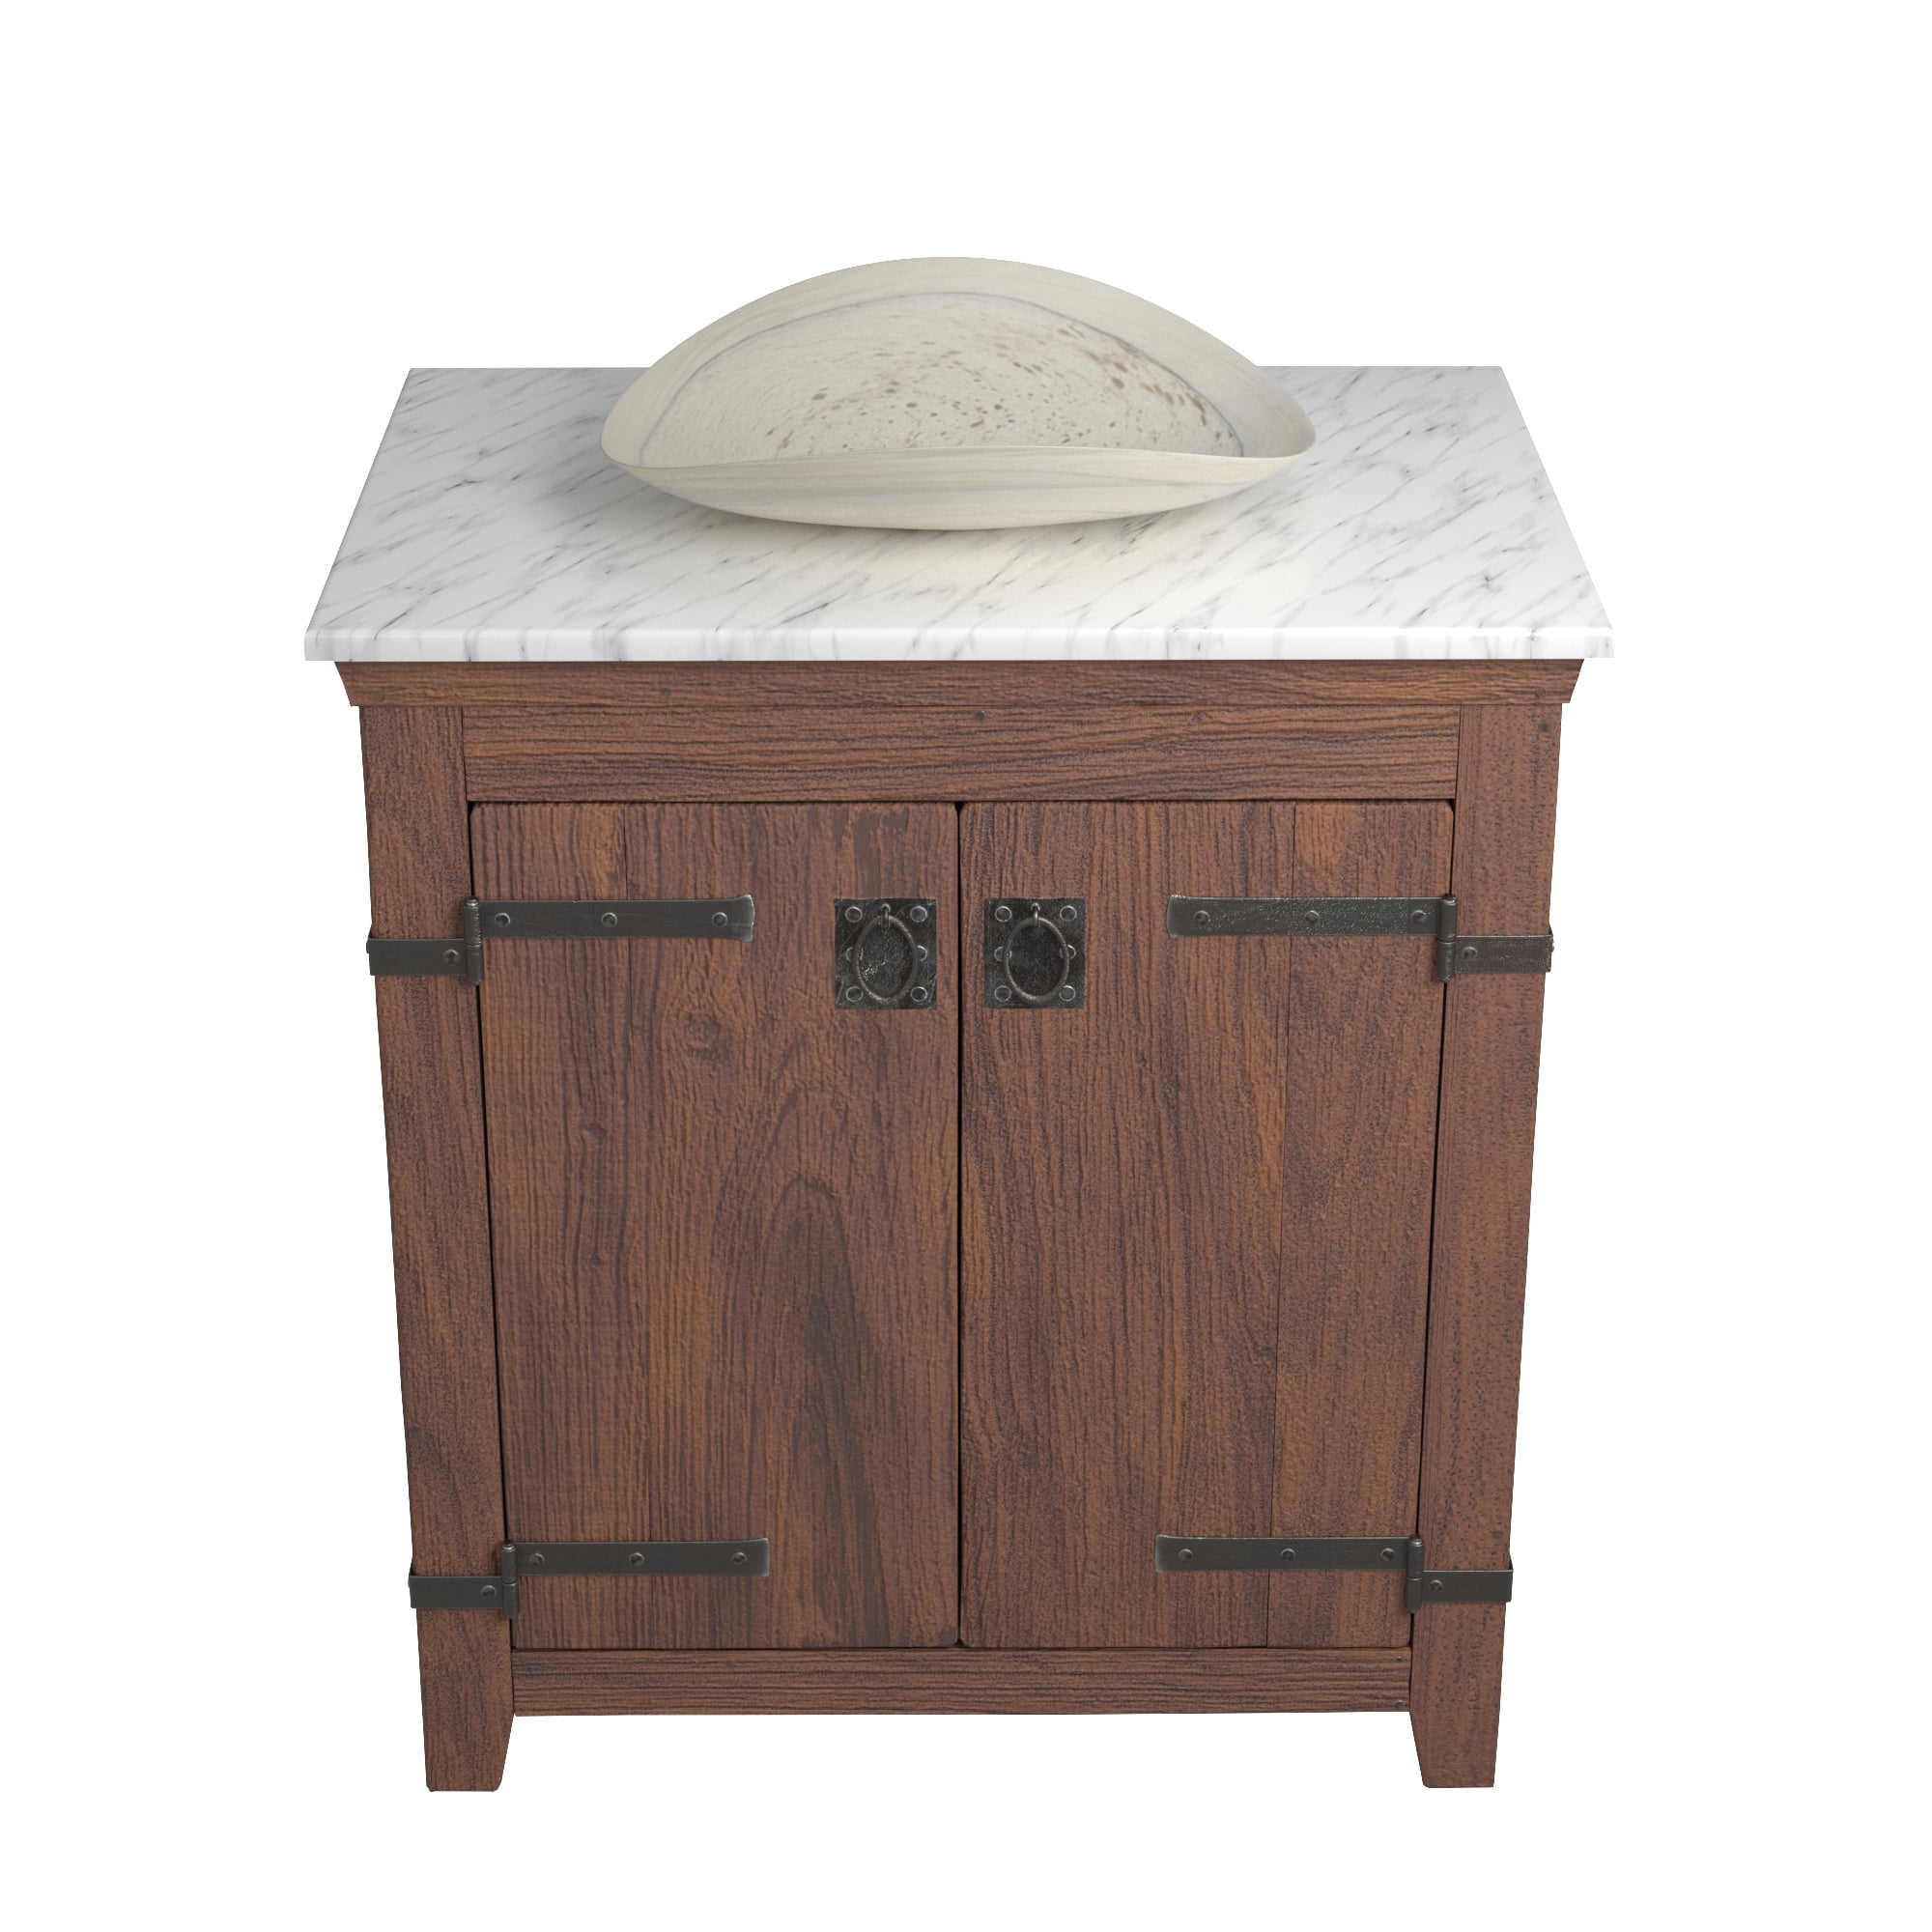 Native Trails 30" Americana Vanity in Chestnut with Carrara Marble Top and Sorrento in Beachcomber, No Faucet Hole, BND30-VB-CT-MG-108